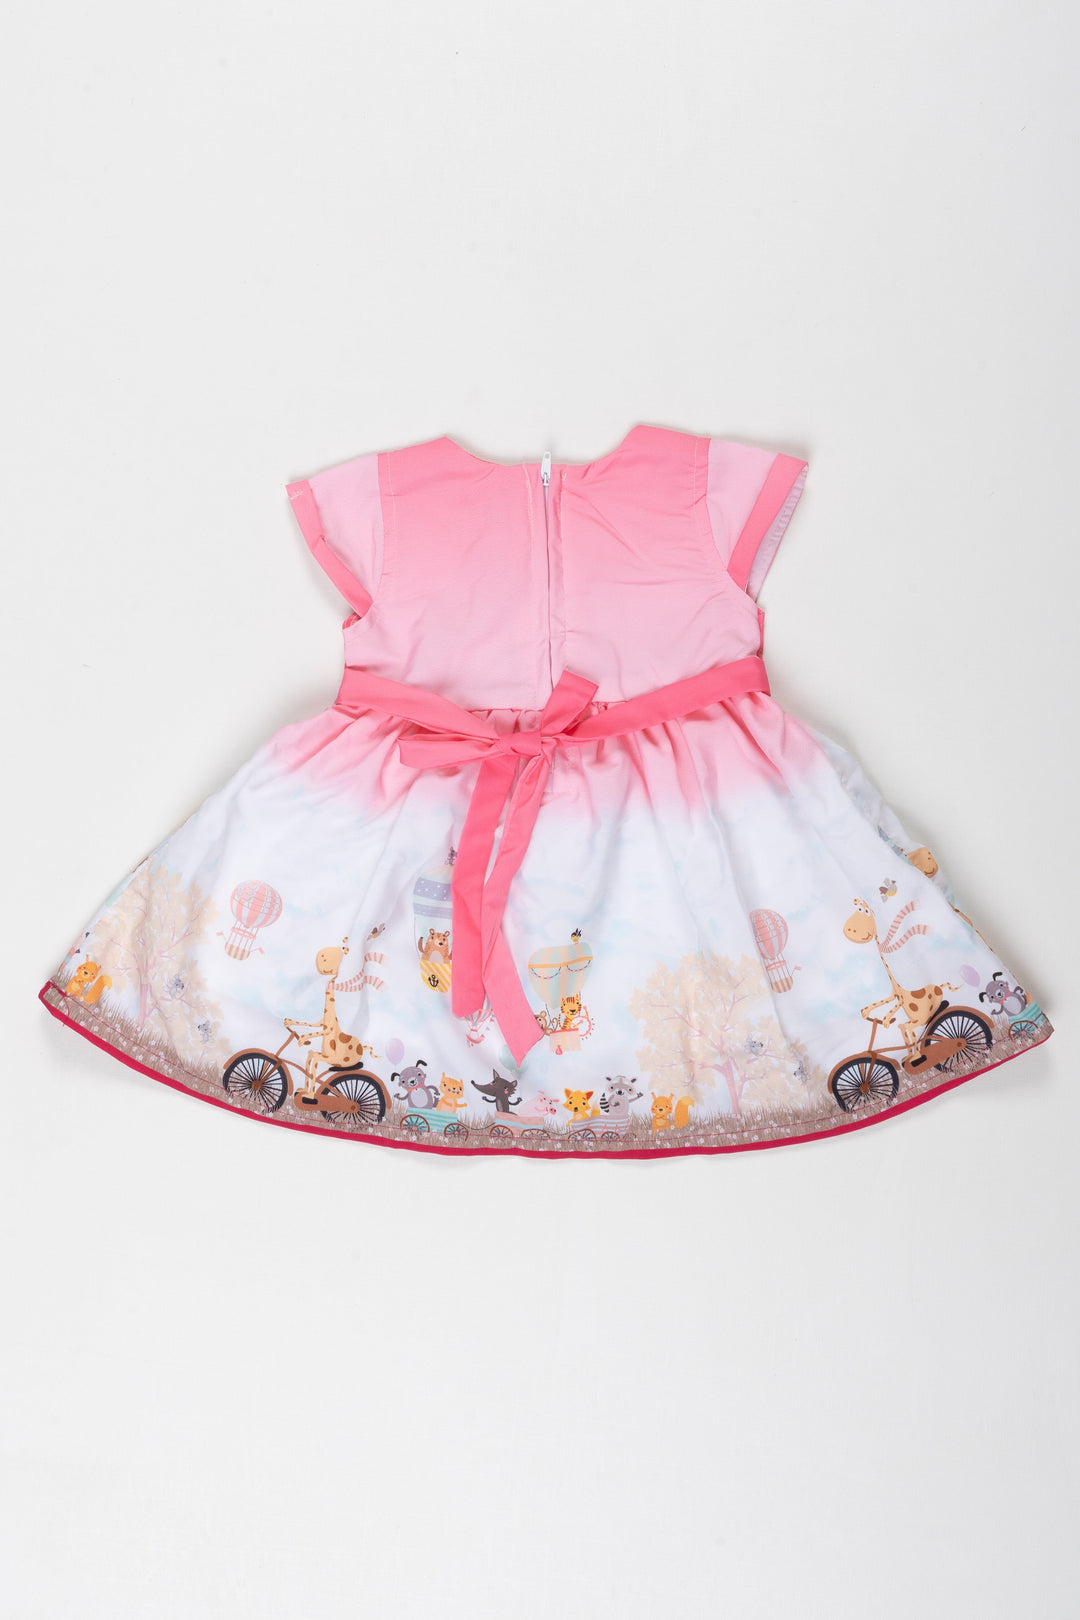 The Nesavu Baby Fancy Frock Enchanted Garden Baby Girl Frock - Pink Delight Edition Nesavu Whimsical Baby Girl Garden Print Frock | Perfect for Special Occasions | The Nesavu